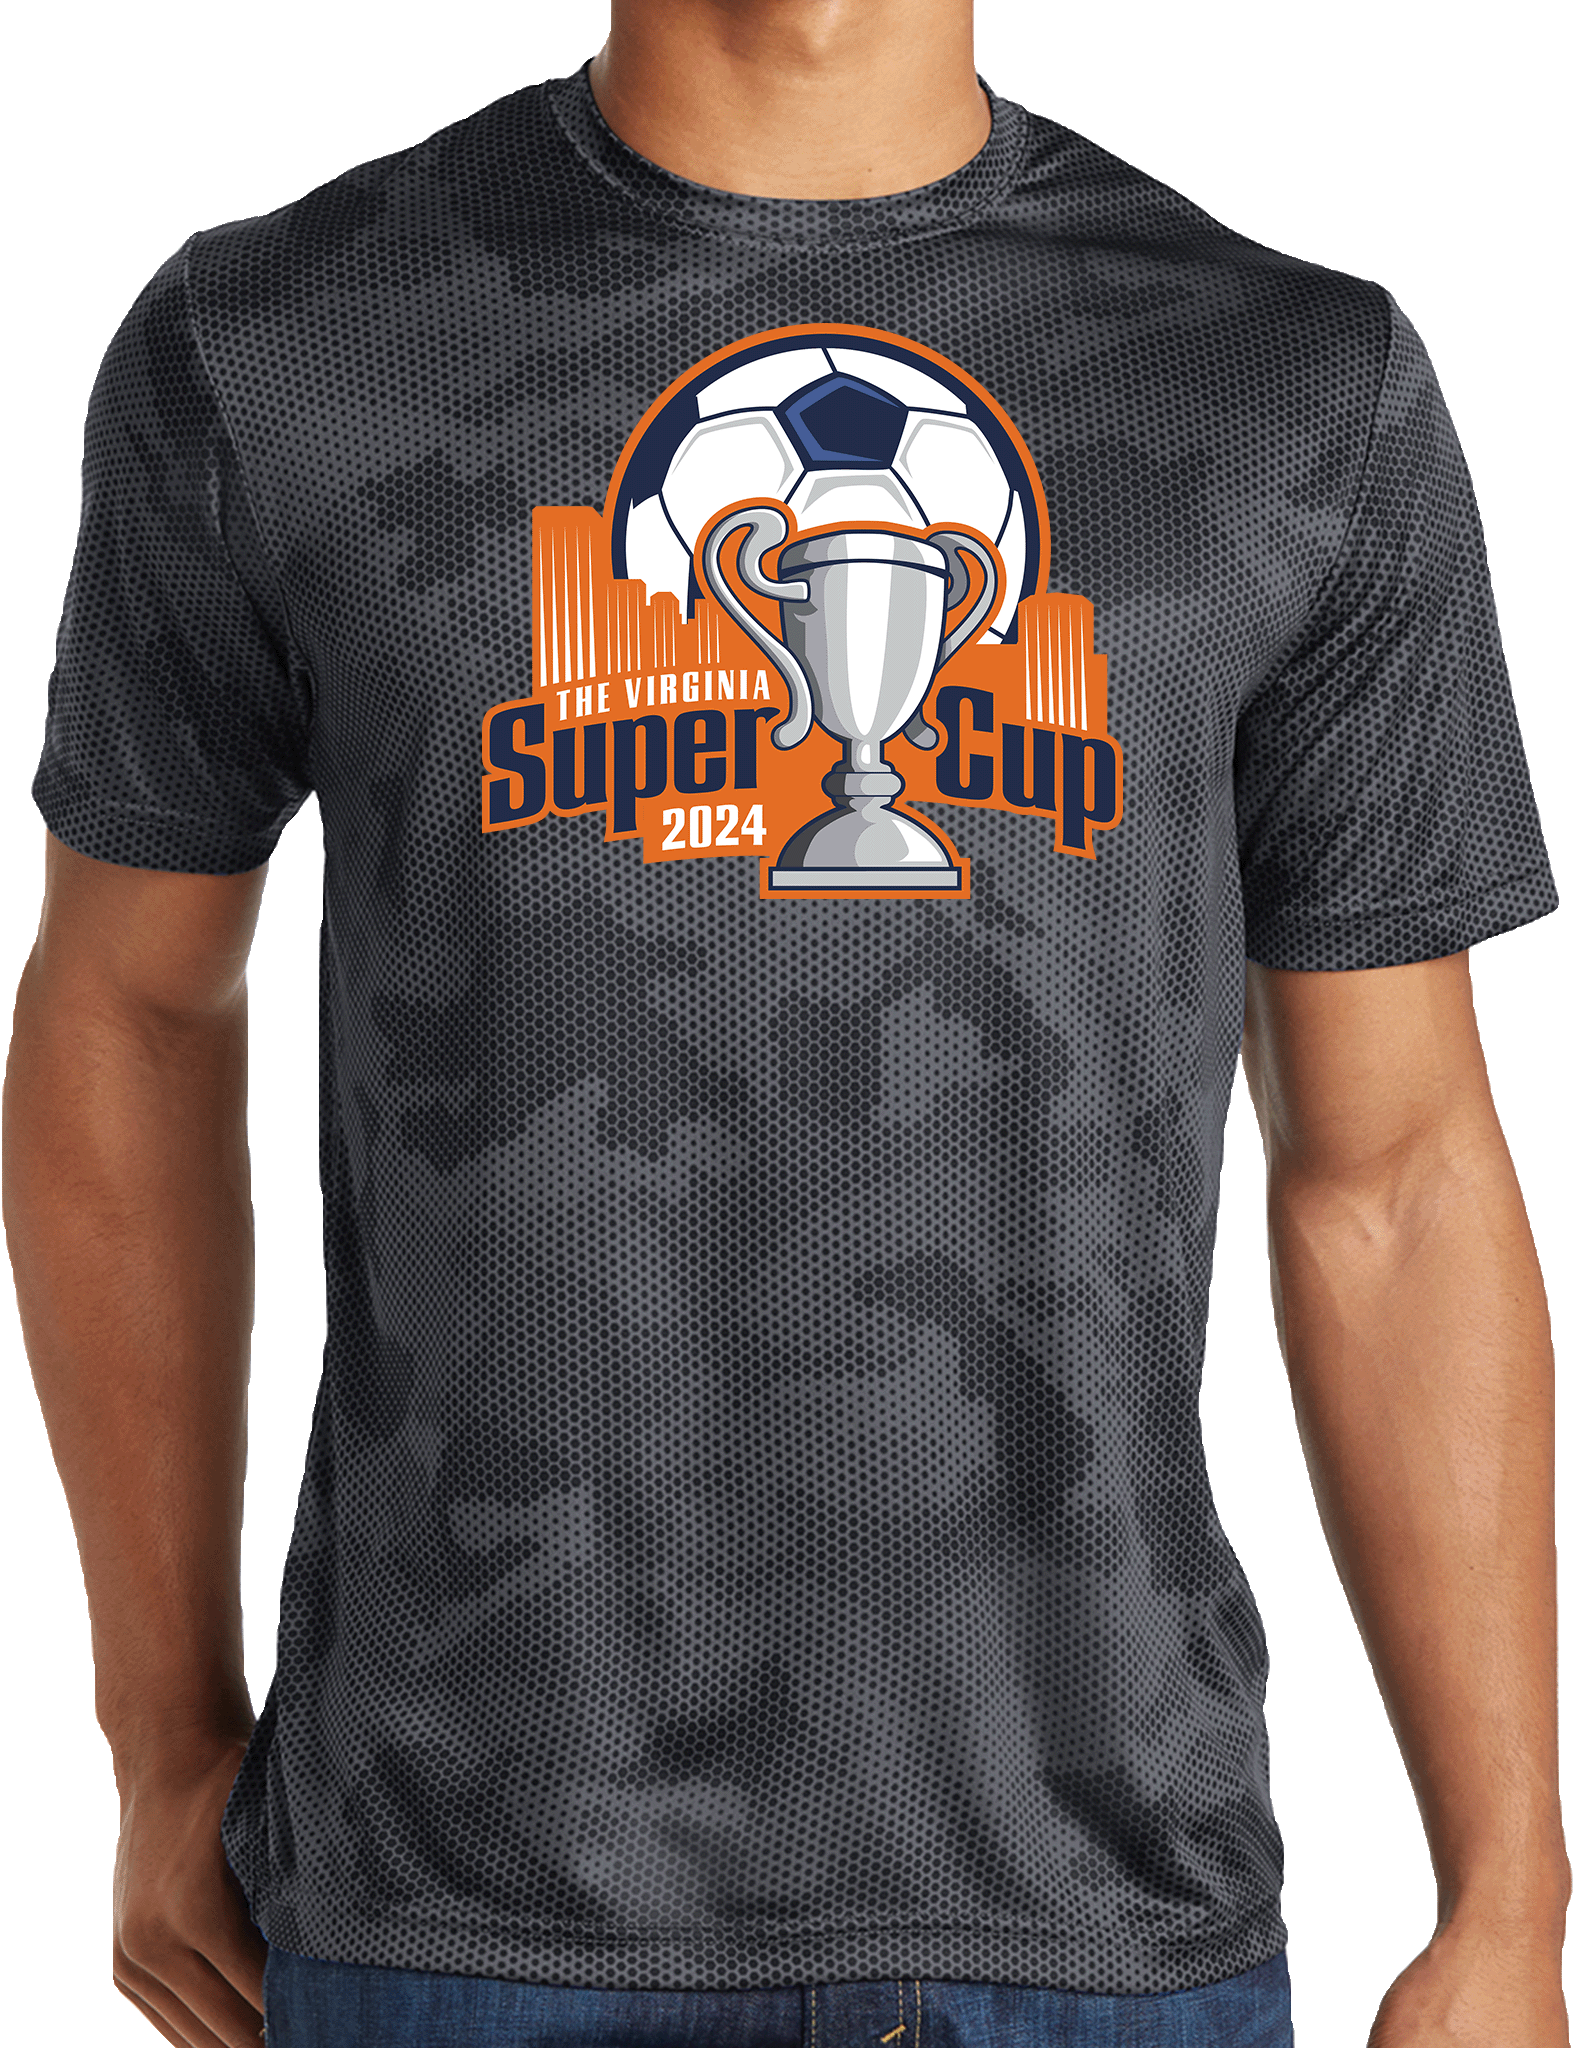 Performance Shirts - 2024 The Virginia Super Cup